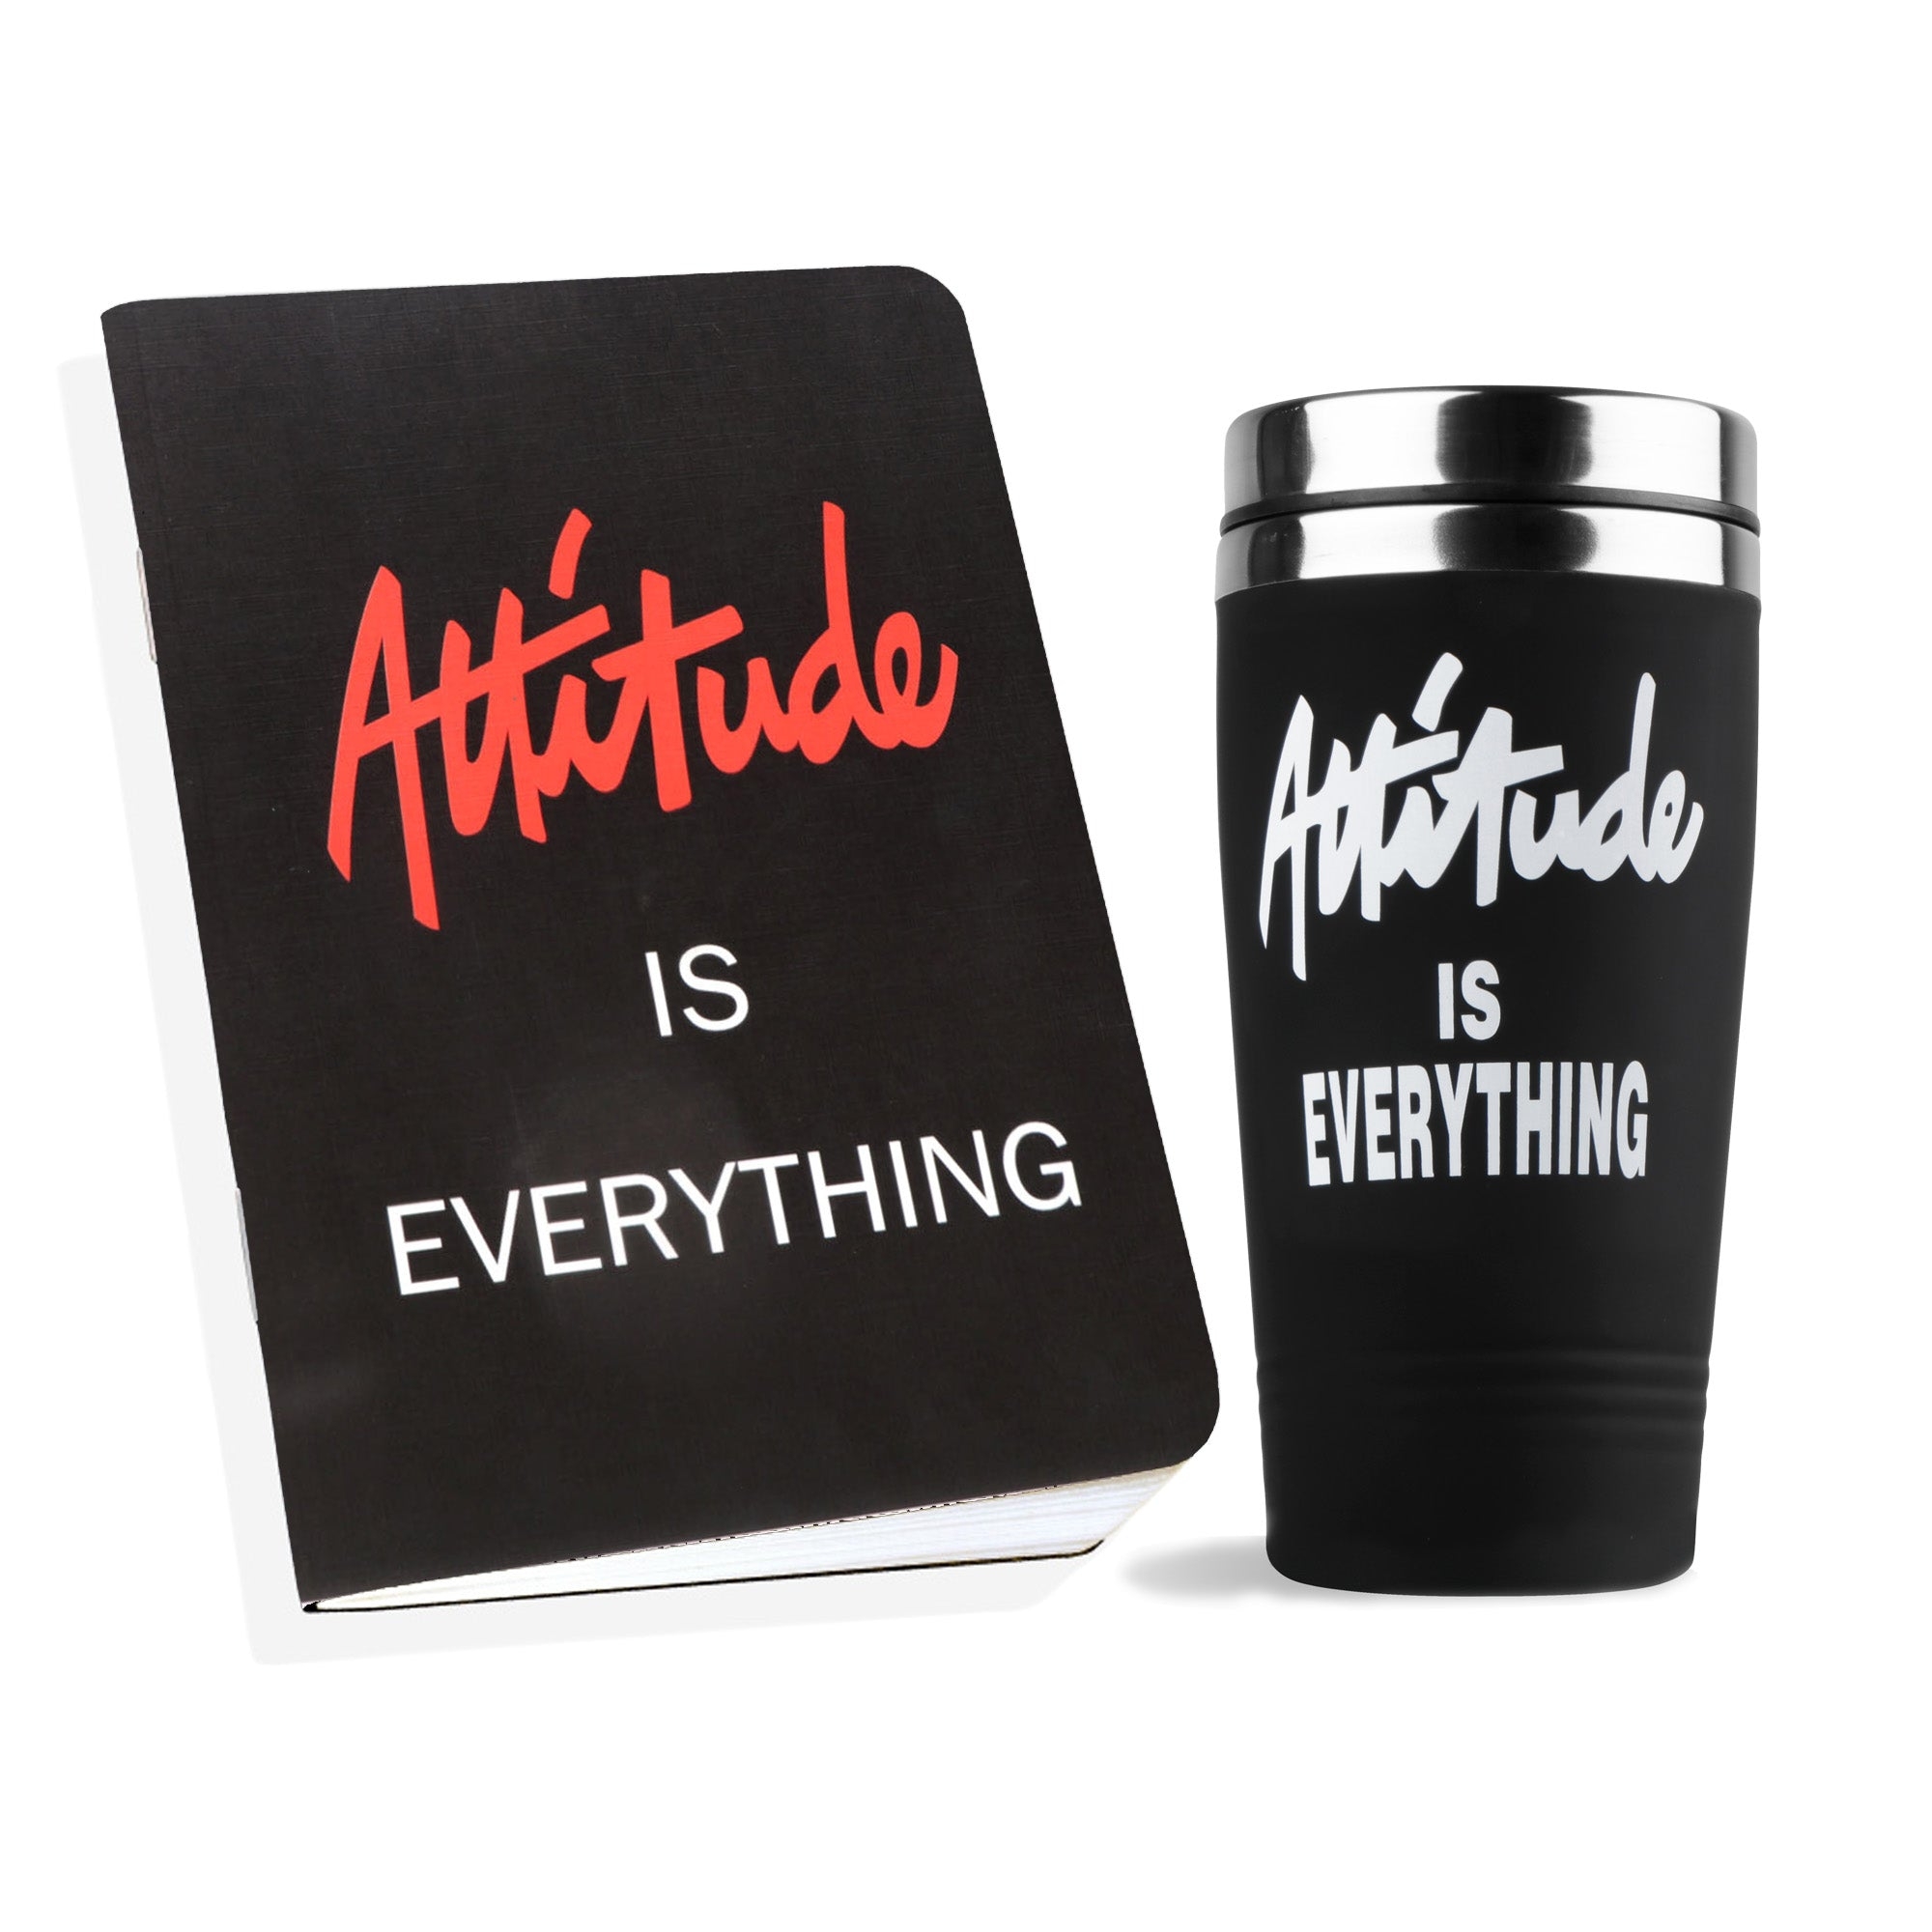 Archies Printed Stainless Steel Sipper/Shaker  & Notebook combo with Corporate Quote Theme